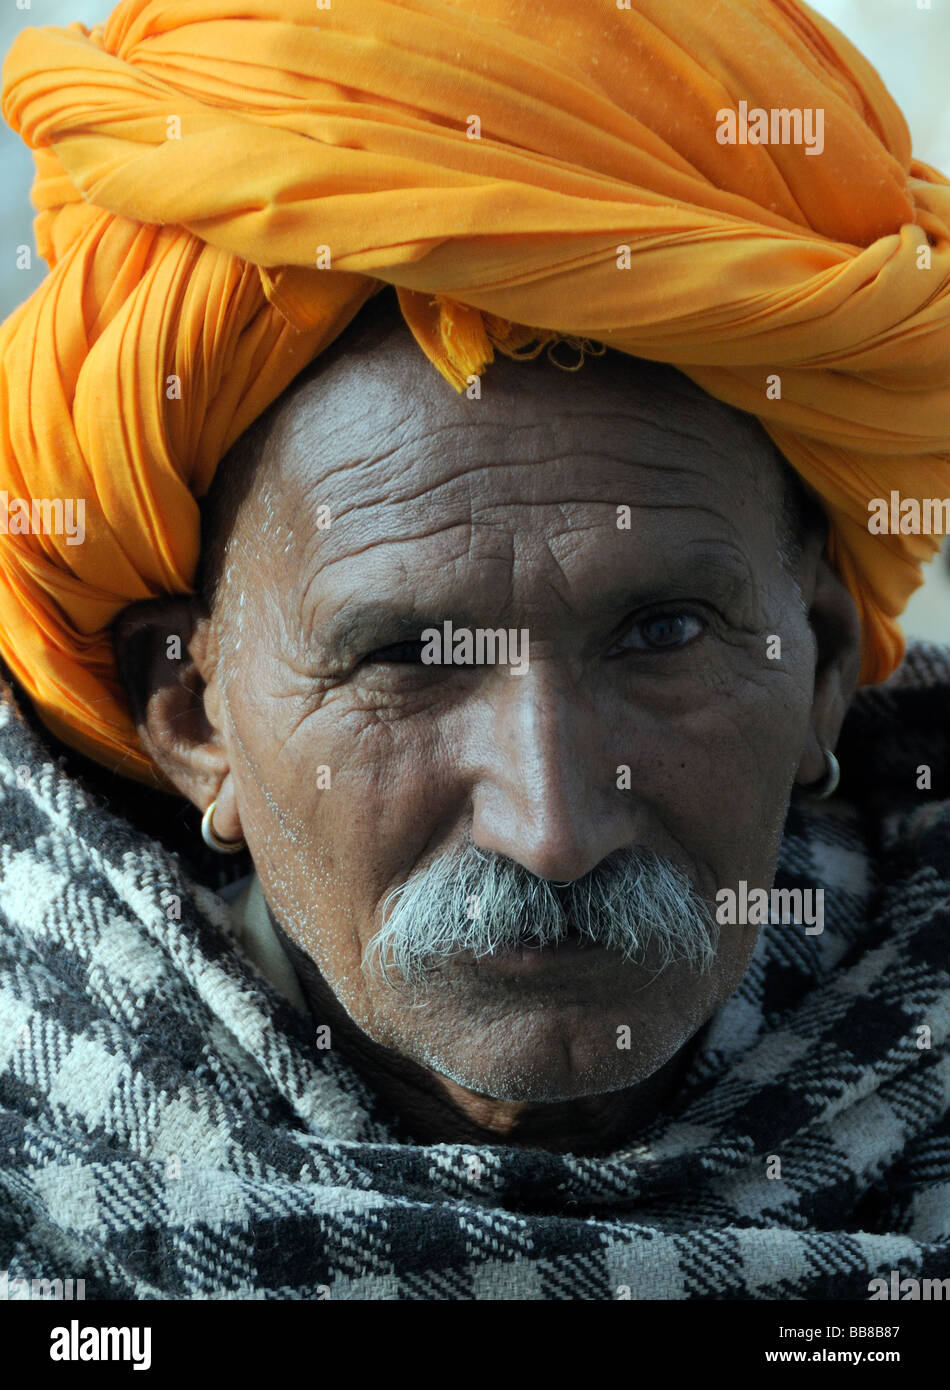 A  man with ear rings, a moustache and an orange turban is wrapped in a chequed wool shawl against the morning chill. Stock Photo